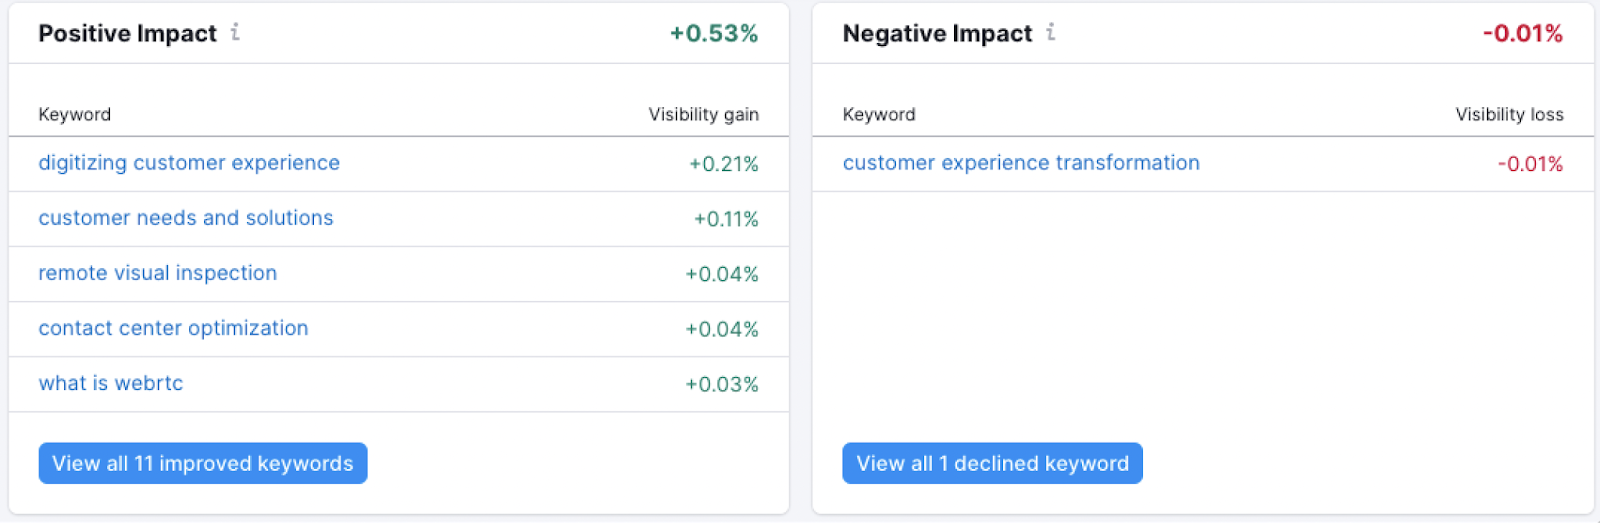 "Positive Impact" and "Negative Impact" widgets in Position Tracking report